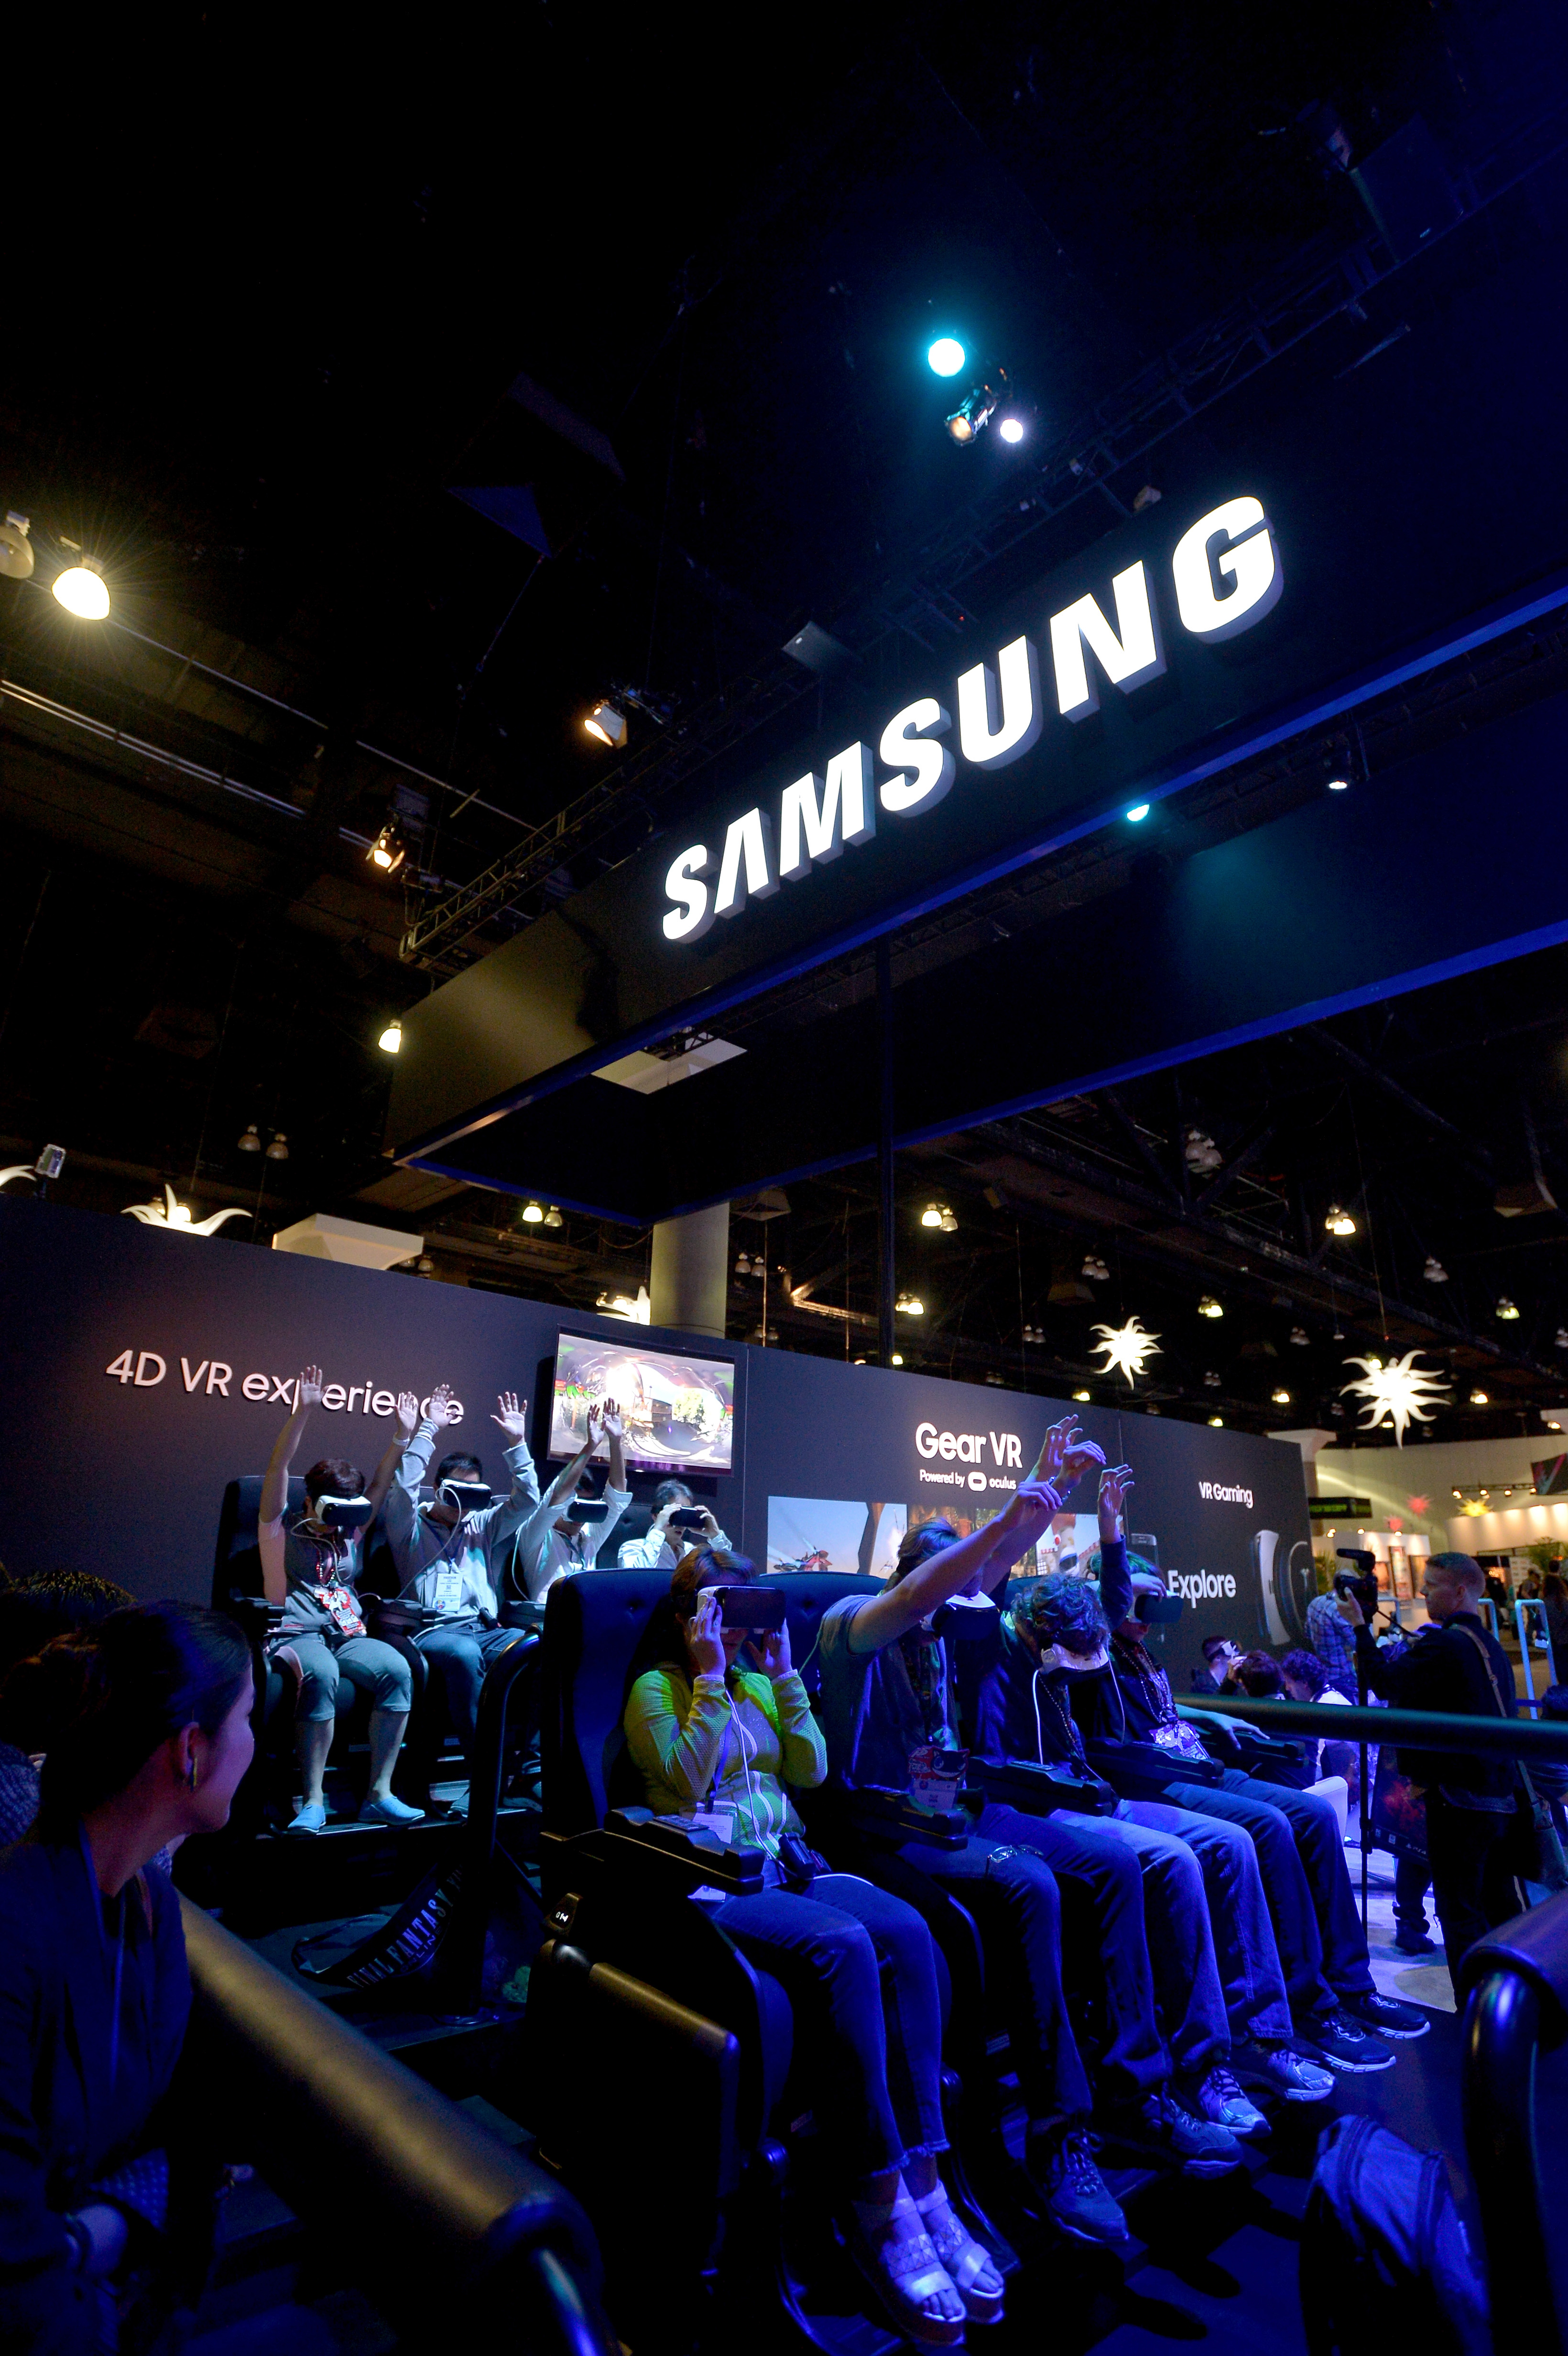 LOS ANGELES, CA - JUNE 14: E3 attendees experience Samsung Gear VR at the Samsung booth at E3 Expo 2016 on June 14, 2016 in Los Angeles, California. (Photo by Charley Gallay/Getty Images for Samsung)